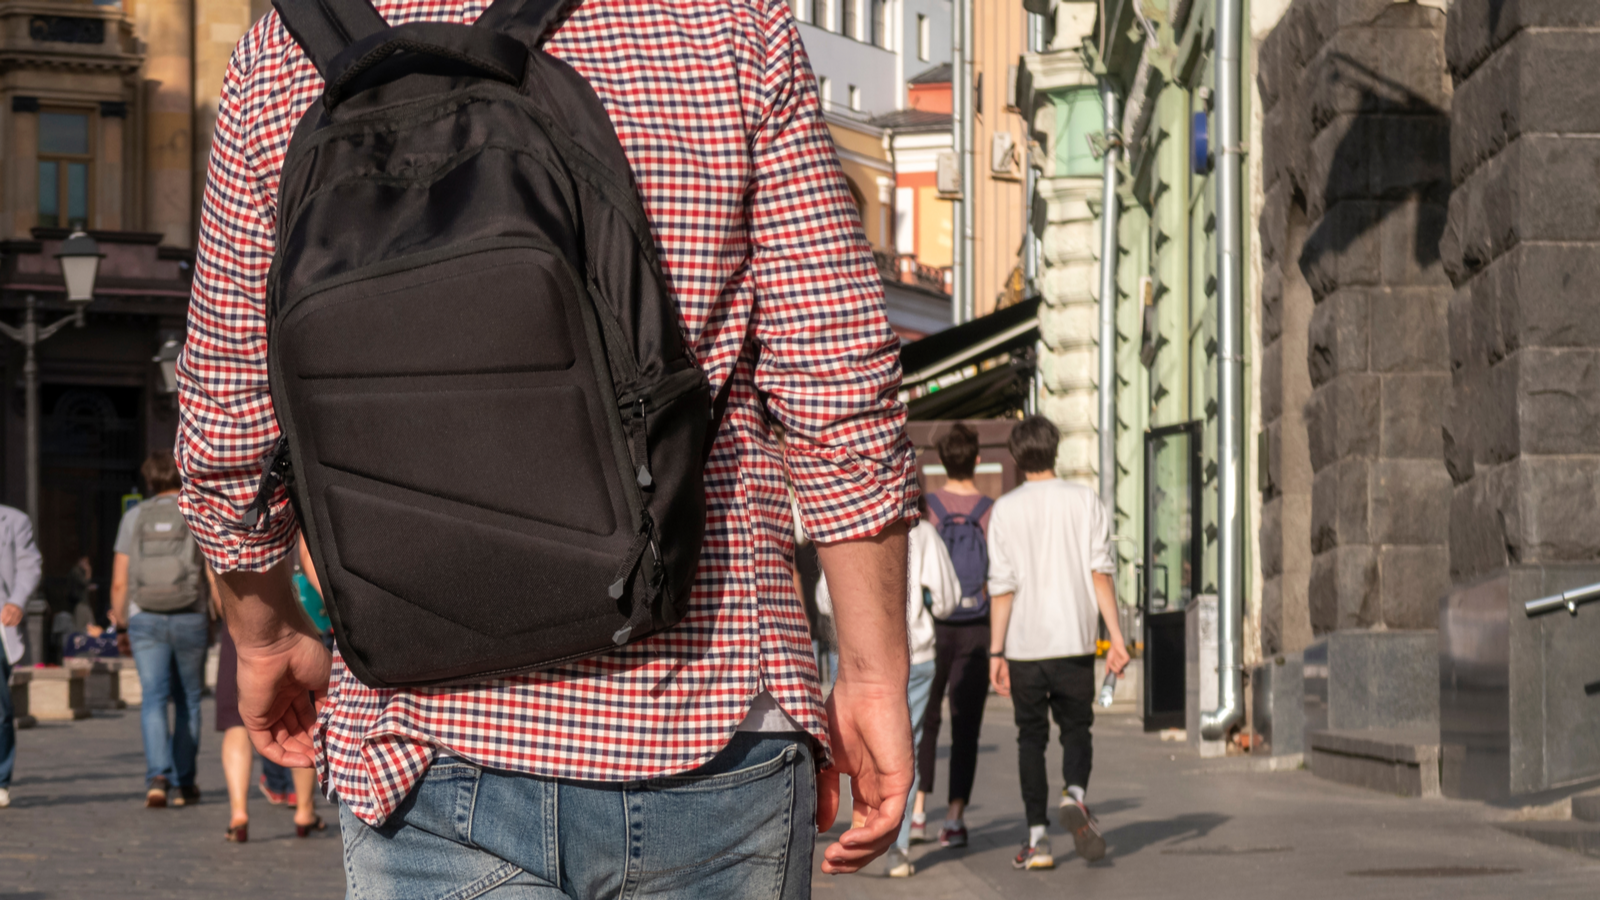 Person walking down a city street wearing a black backpack